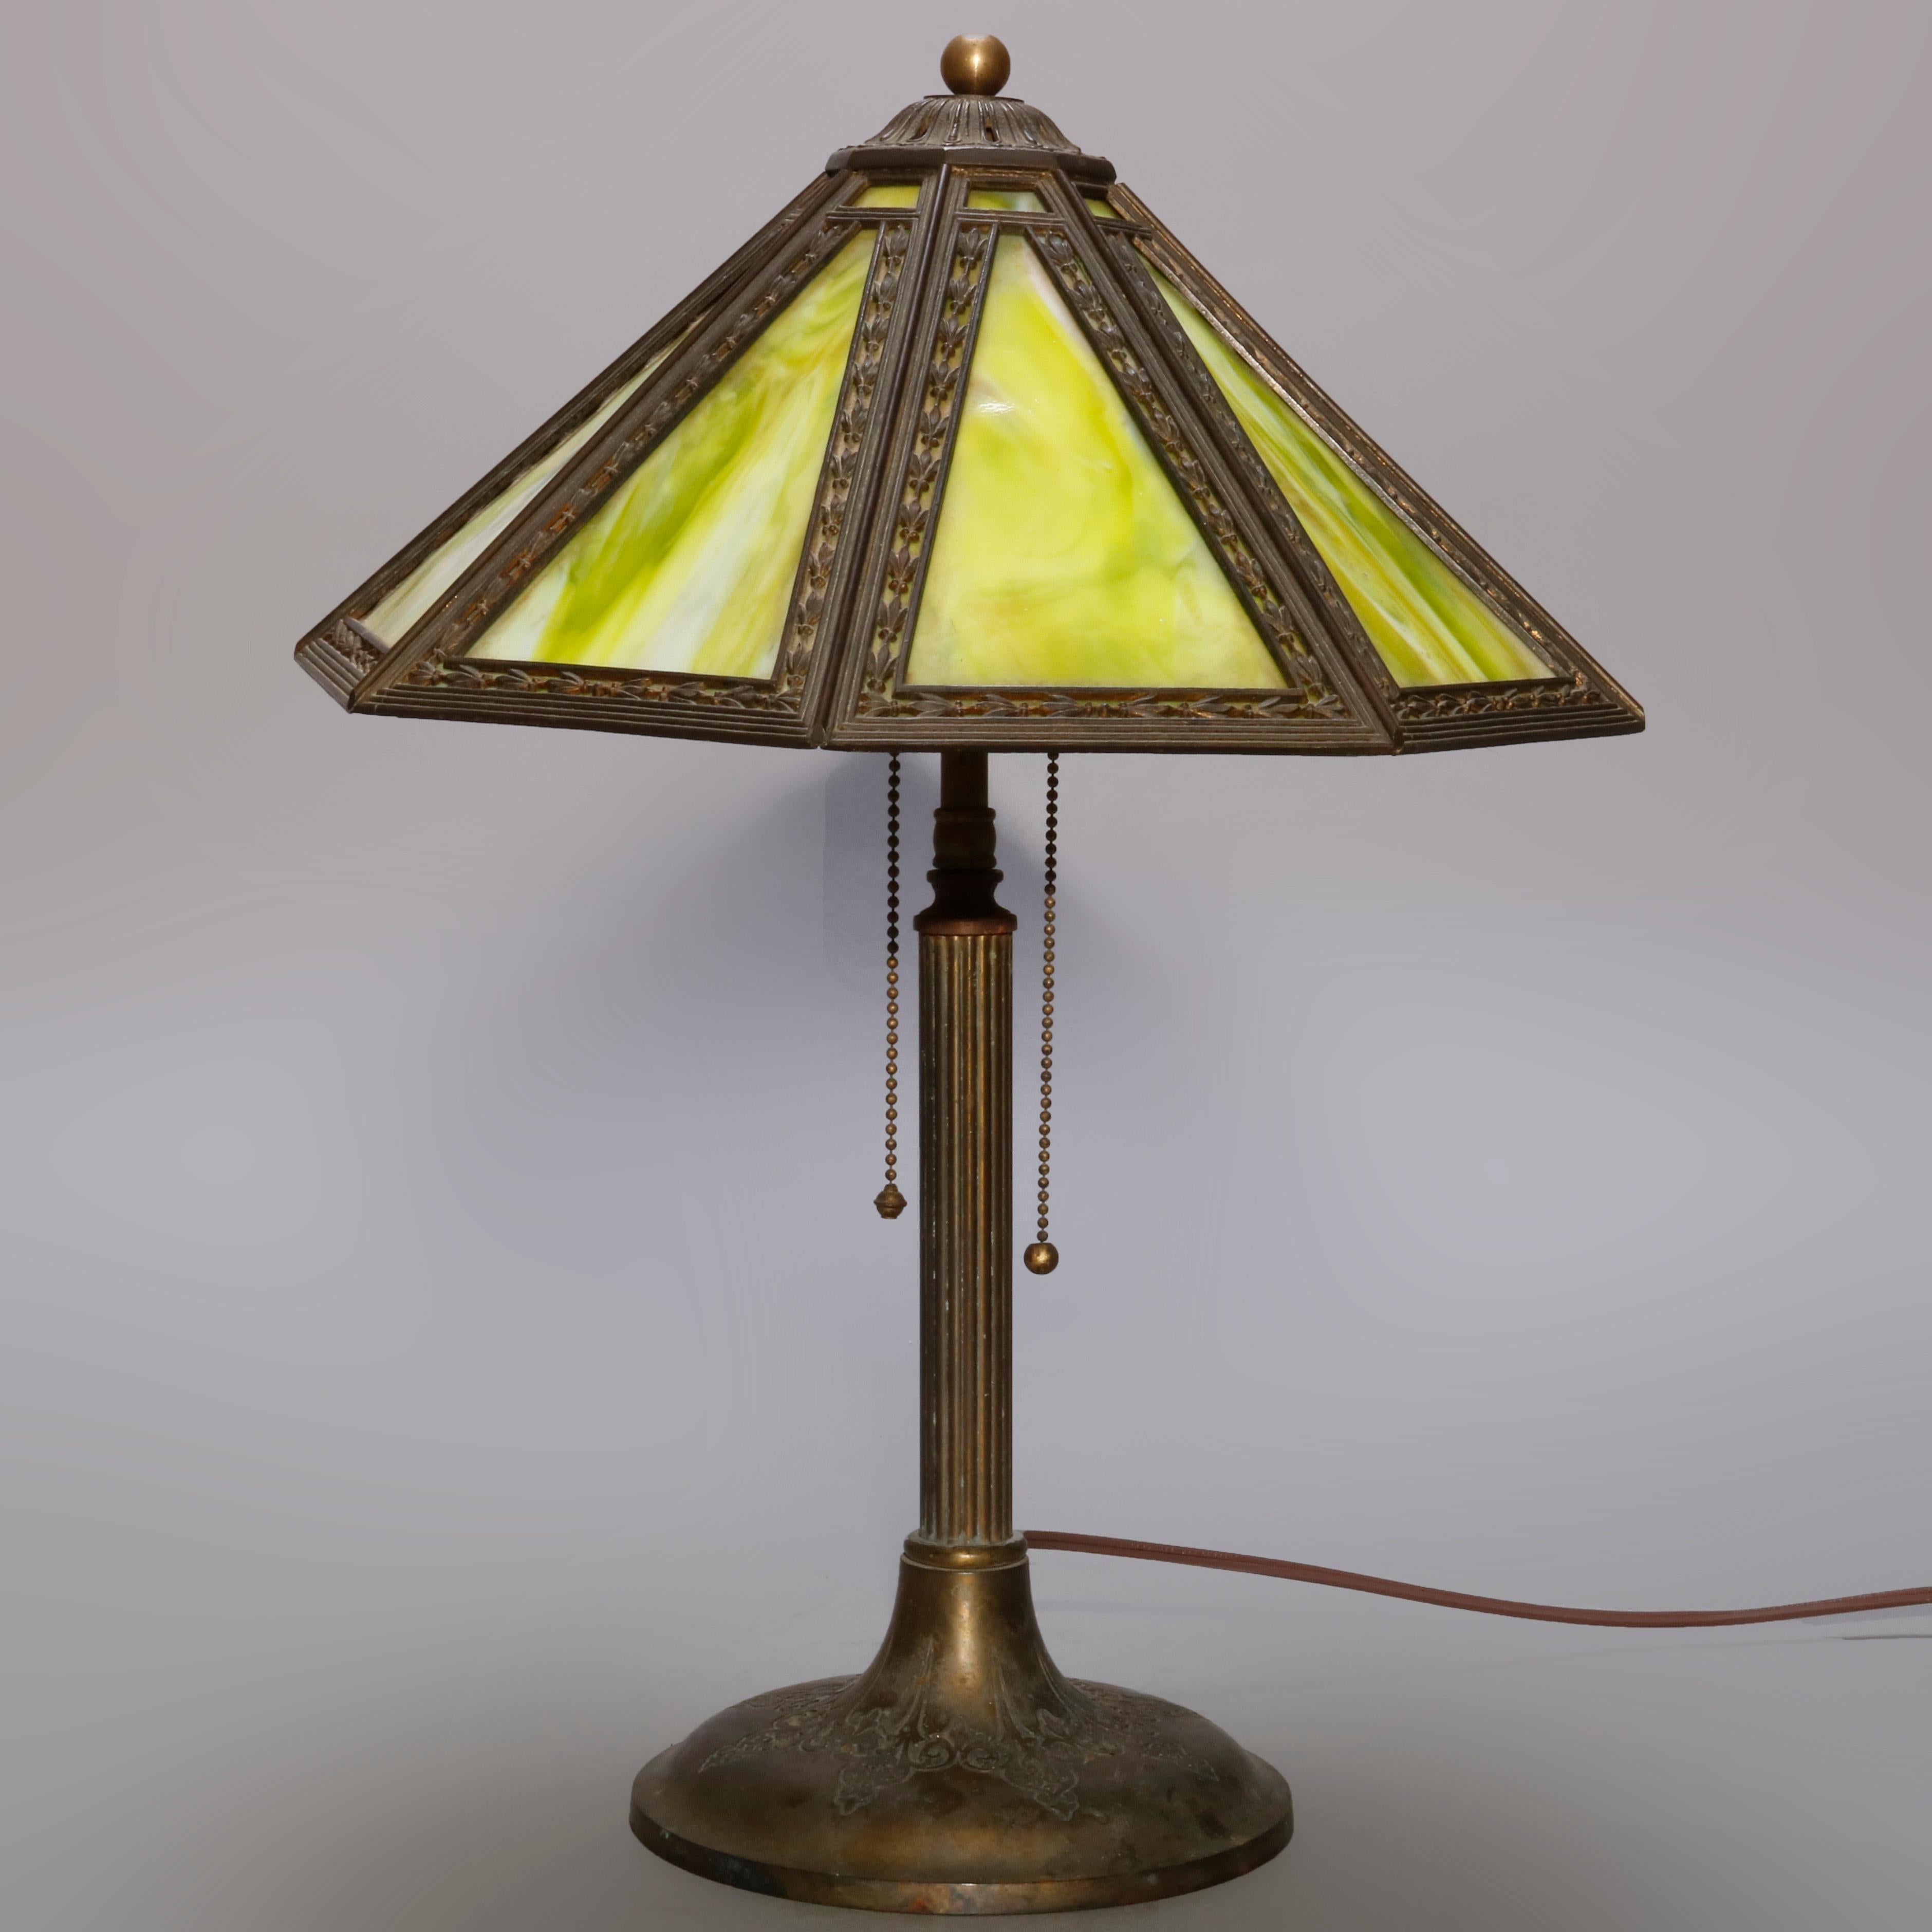 An antique Arts & Crafts table lamp by Bradley and Hubbard offers paneled shade having pierce bellflower frame and housing green slag glass over double socket base with reeded column and seated on base with foliate scroll decoration, circa